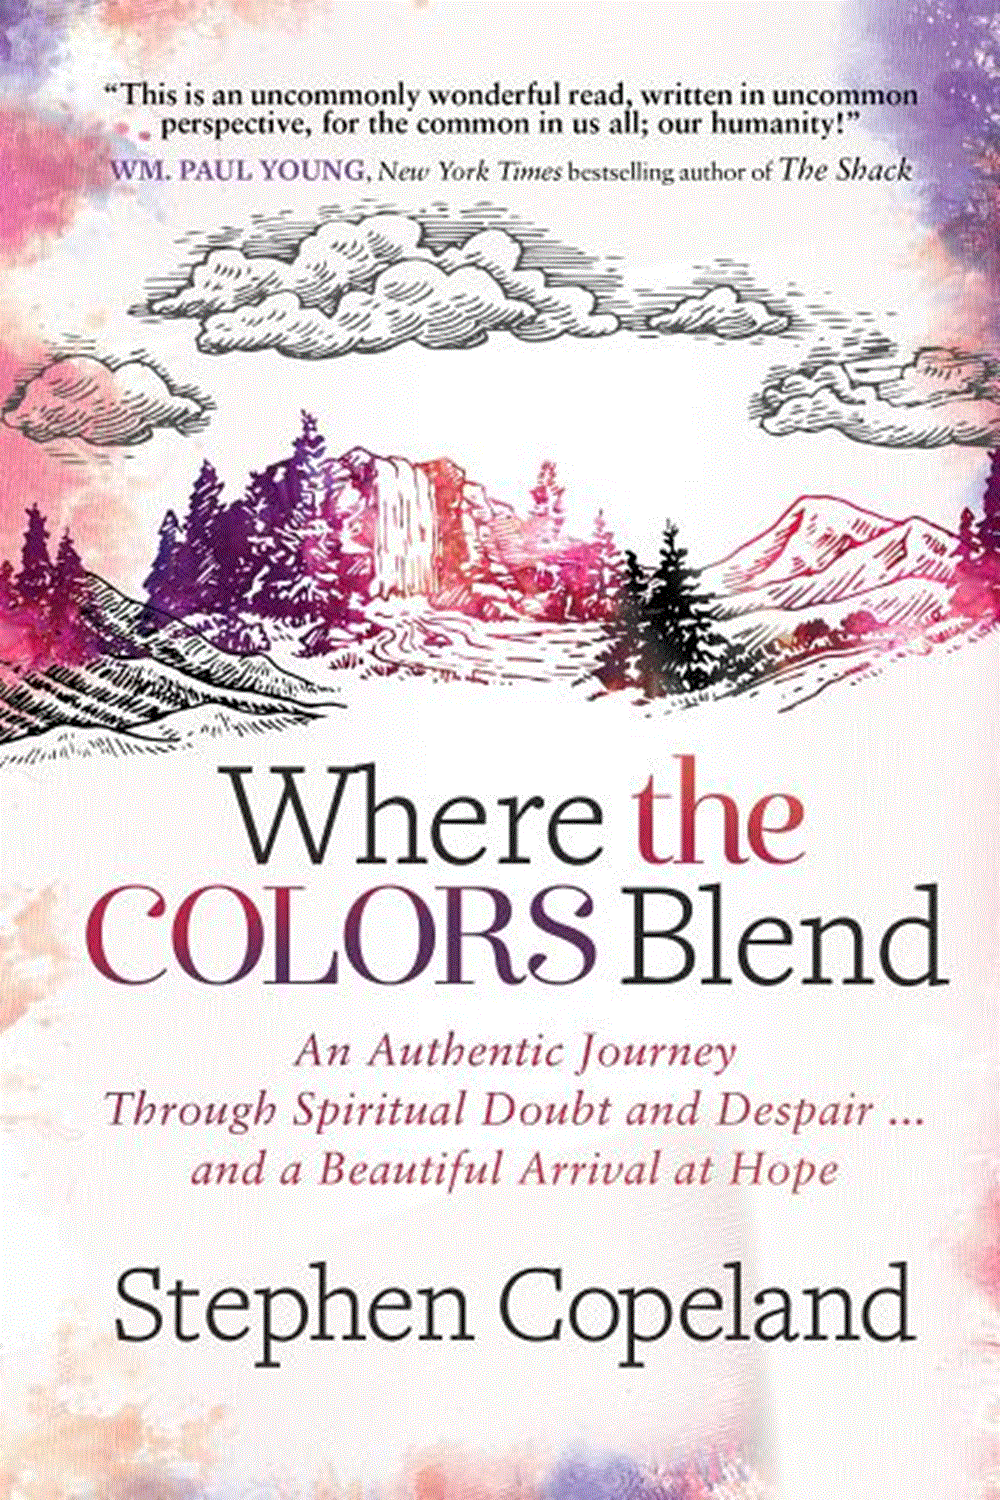 Where the Colors Blend: An Authentic Journey Through Spiritual Doubt and Despair ... and a Beautiful